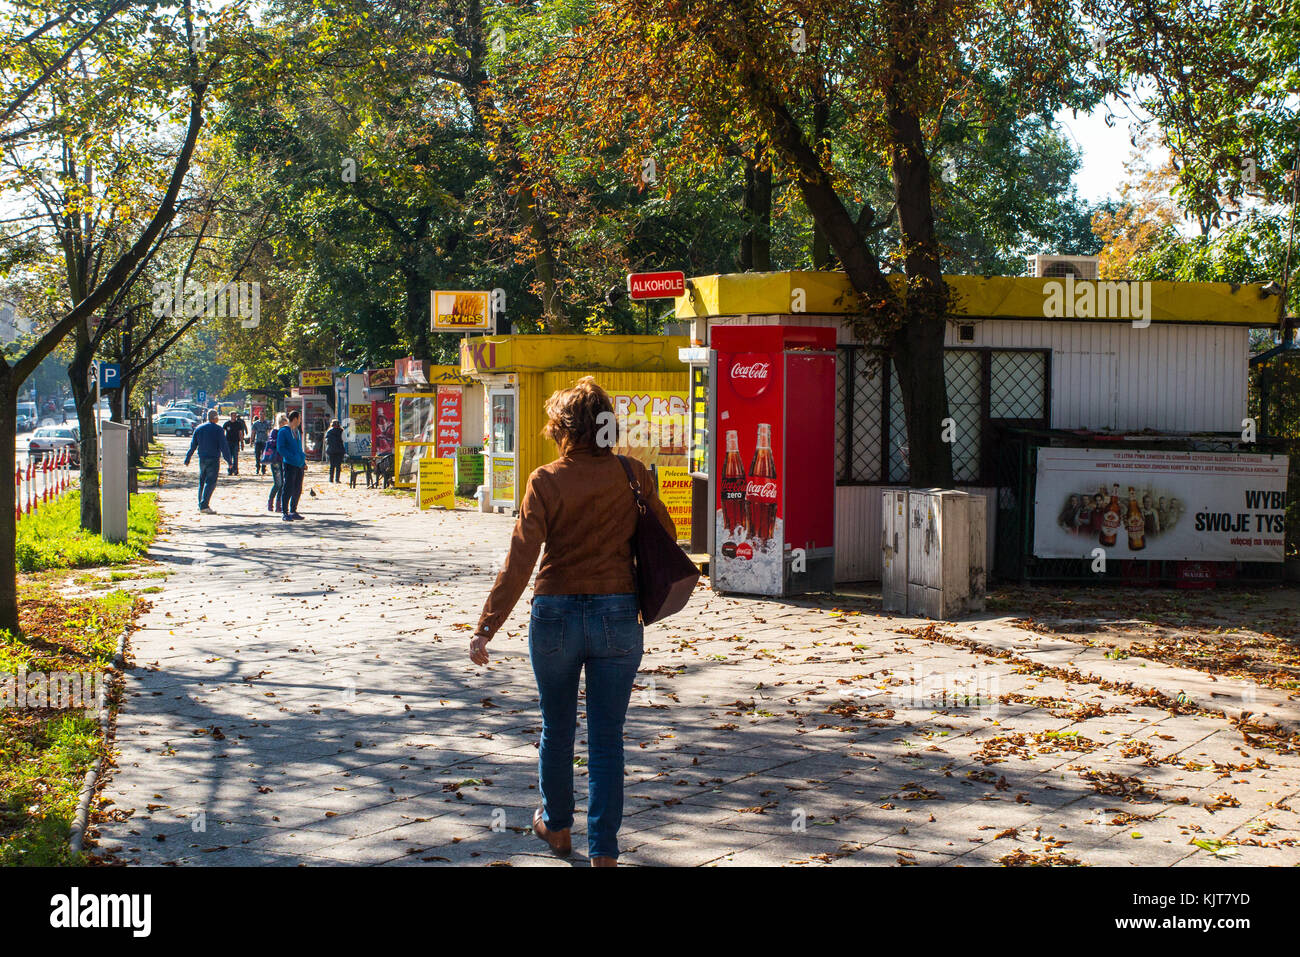 People walking along a street past small food and drink stalls / outlets in the Polish city of Czestochowa Poland  during Autumn time Stock Photo